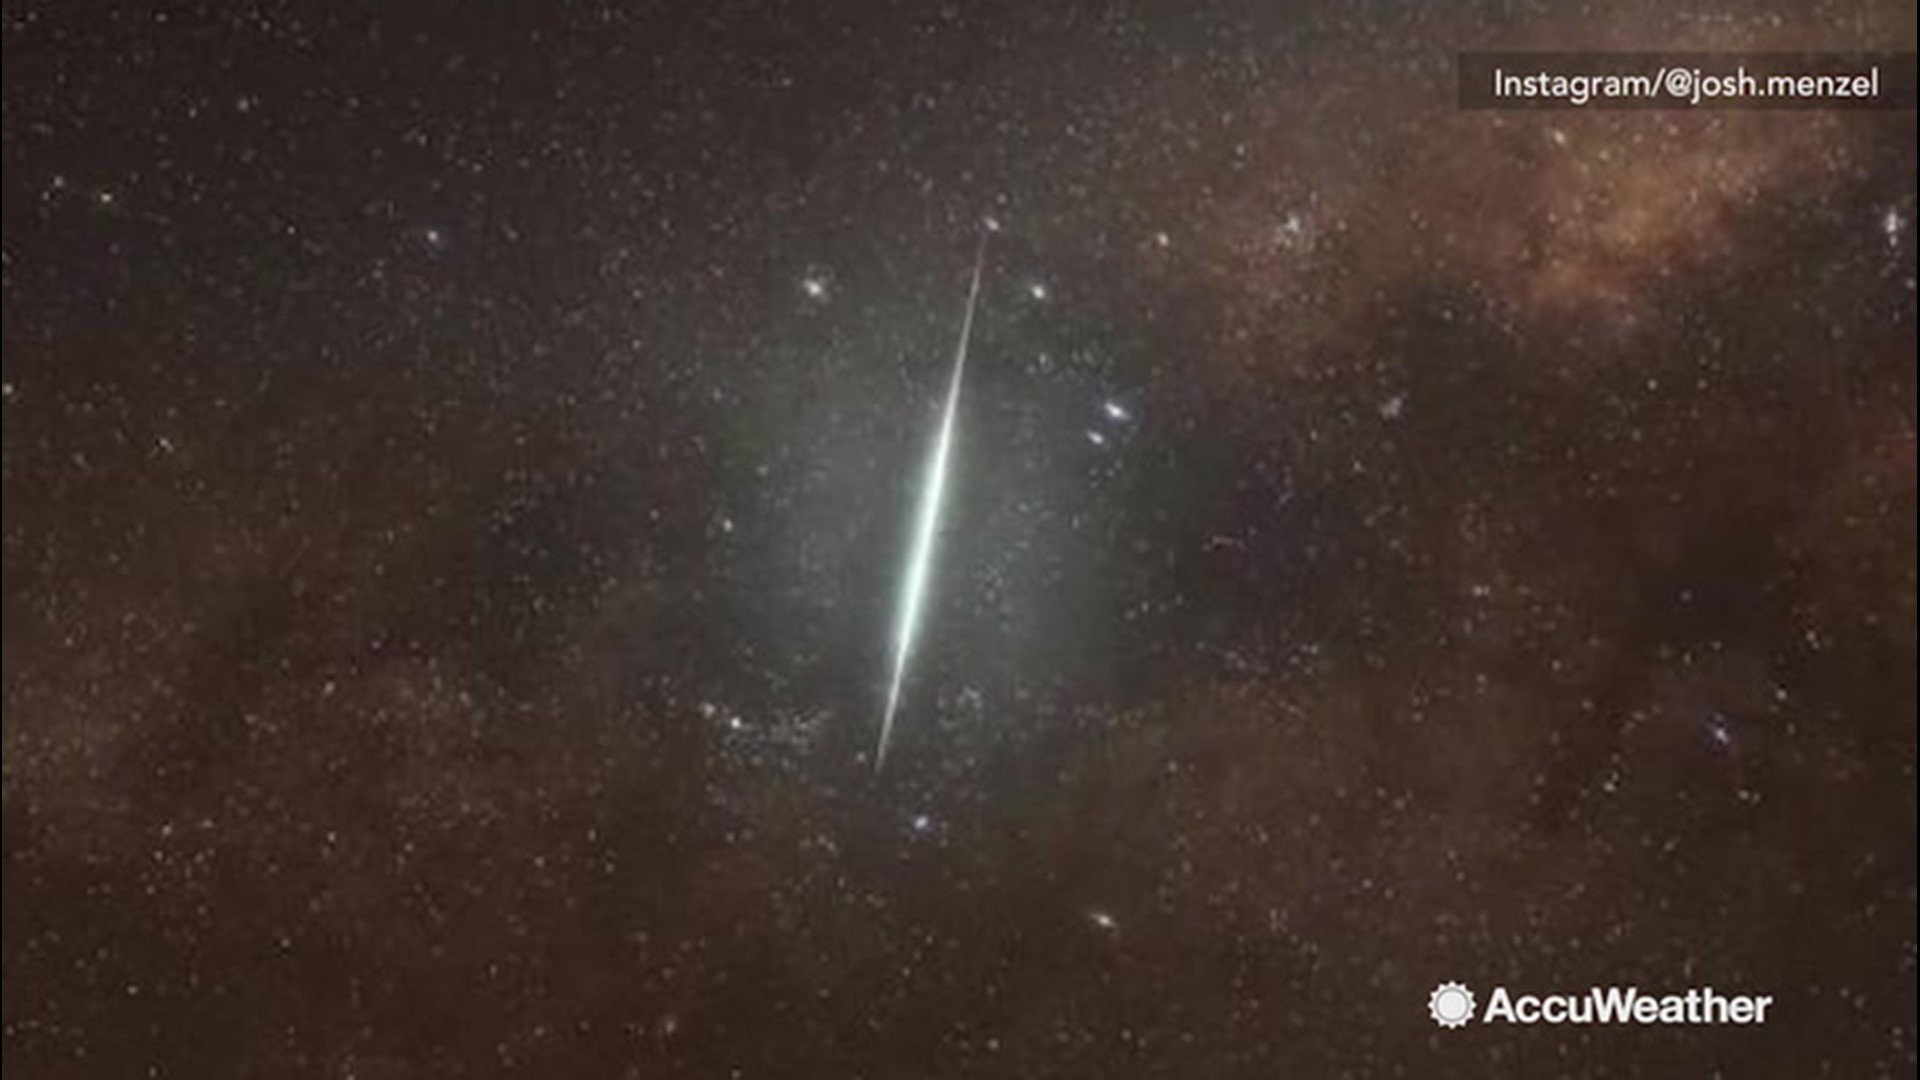 The month of July will wrap up with the peak of not one, but two meteor showers!  They are the Southern Delta Aquarids and the Alpha Capricornids.  Don't miss out on catching some shooting stars on the night of July 29-30.